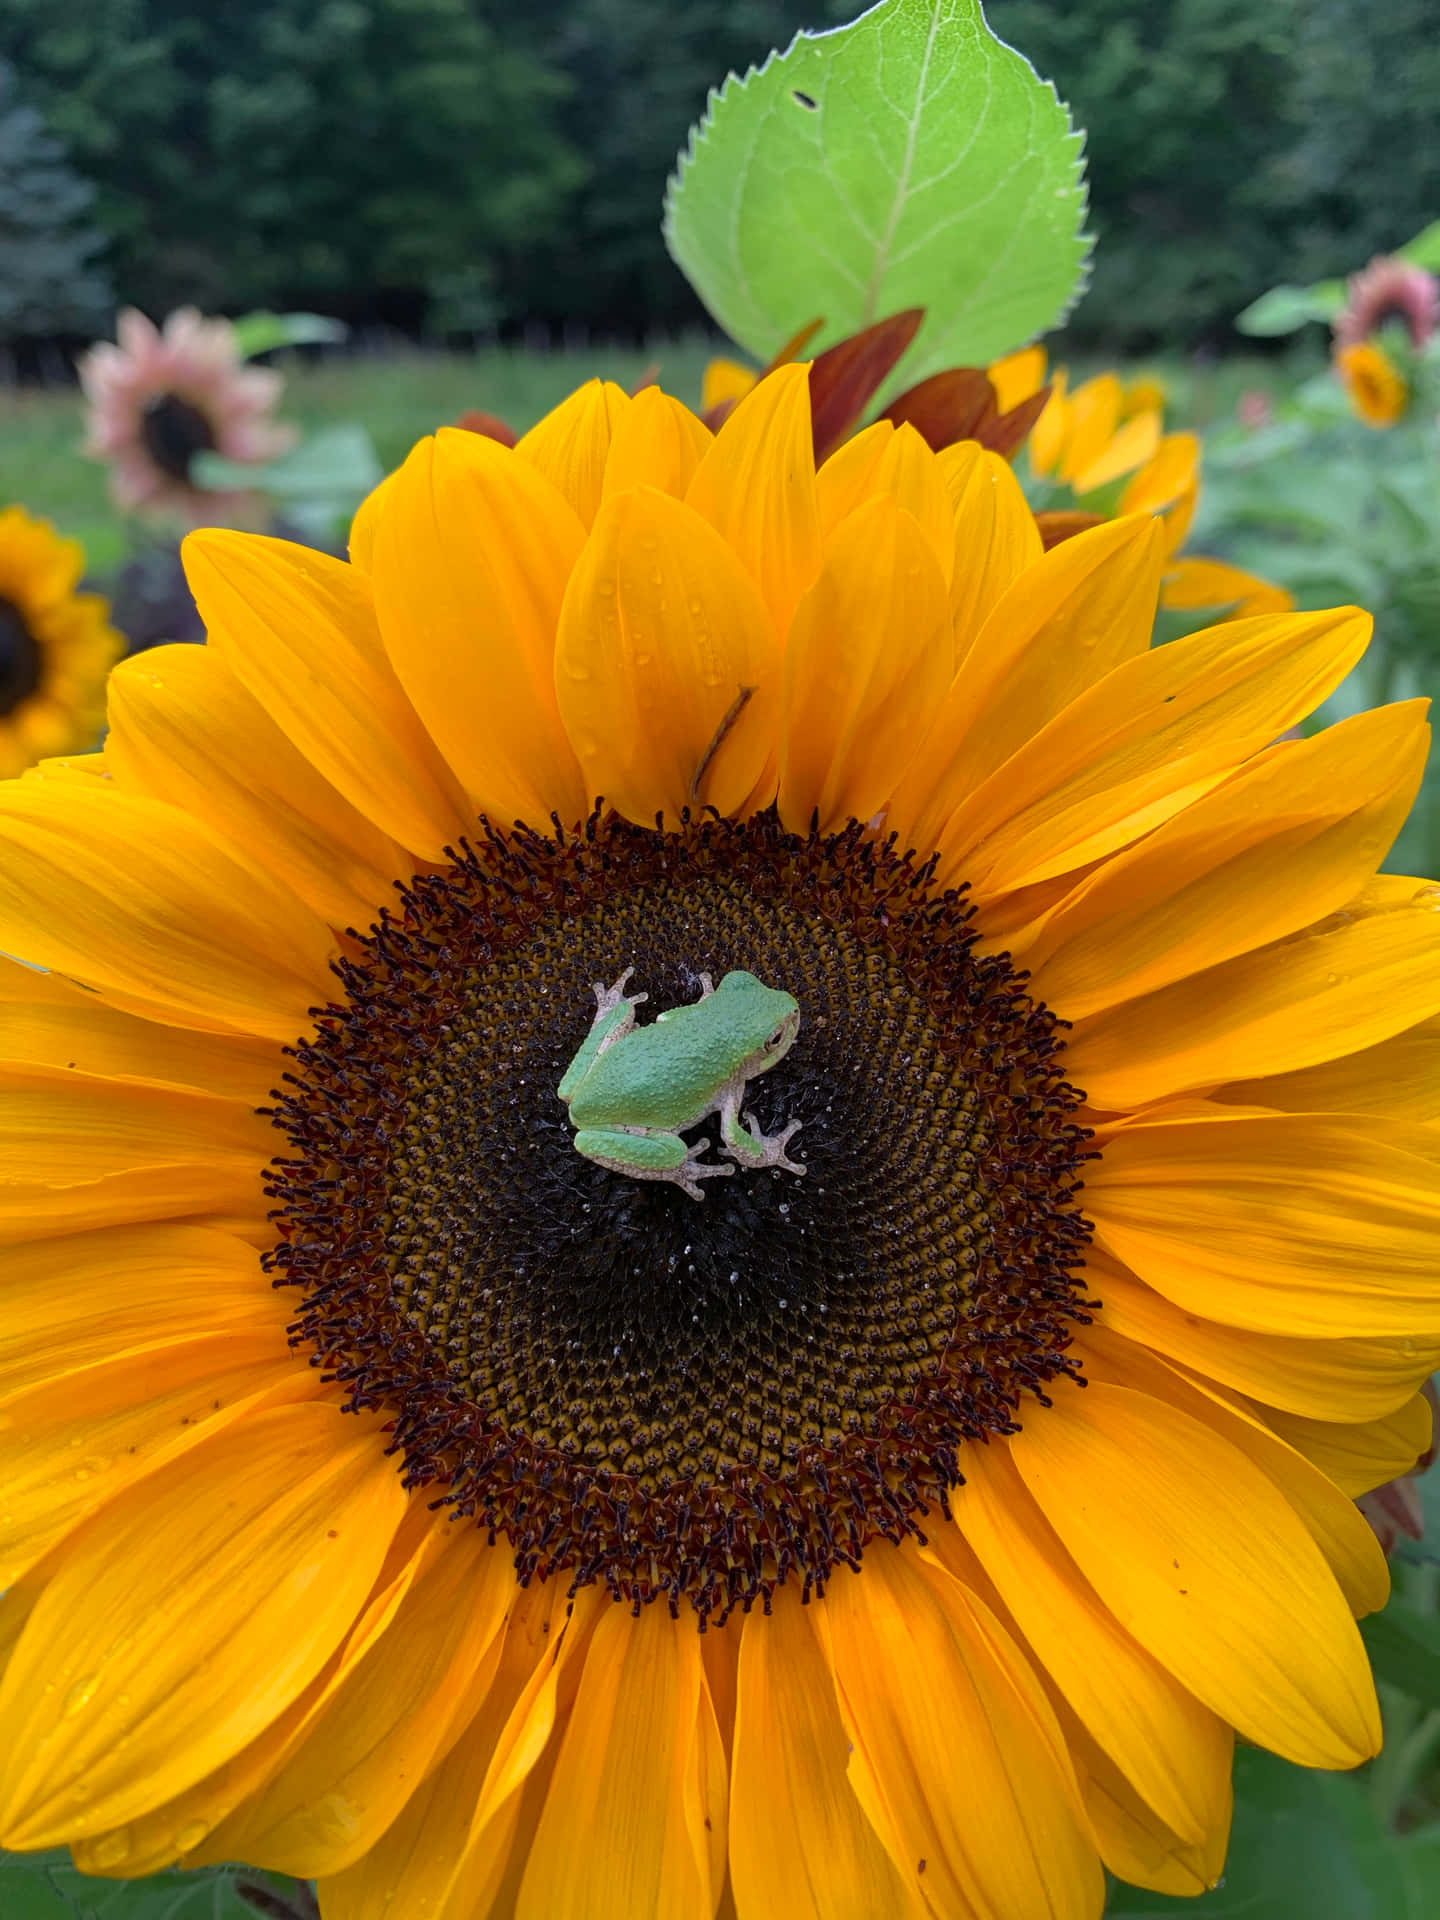 "Take a moment to appreciate the beauty of this sunflower"